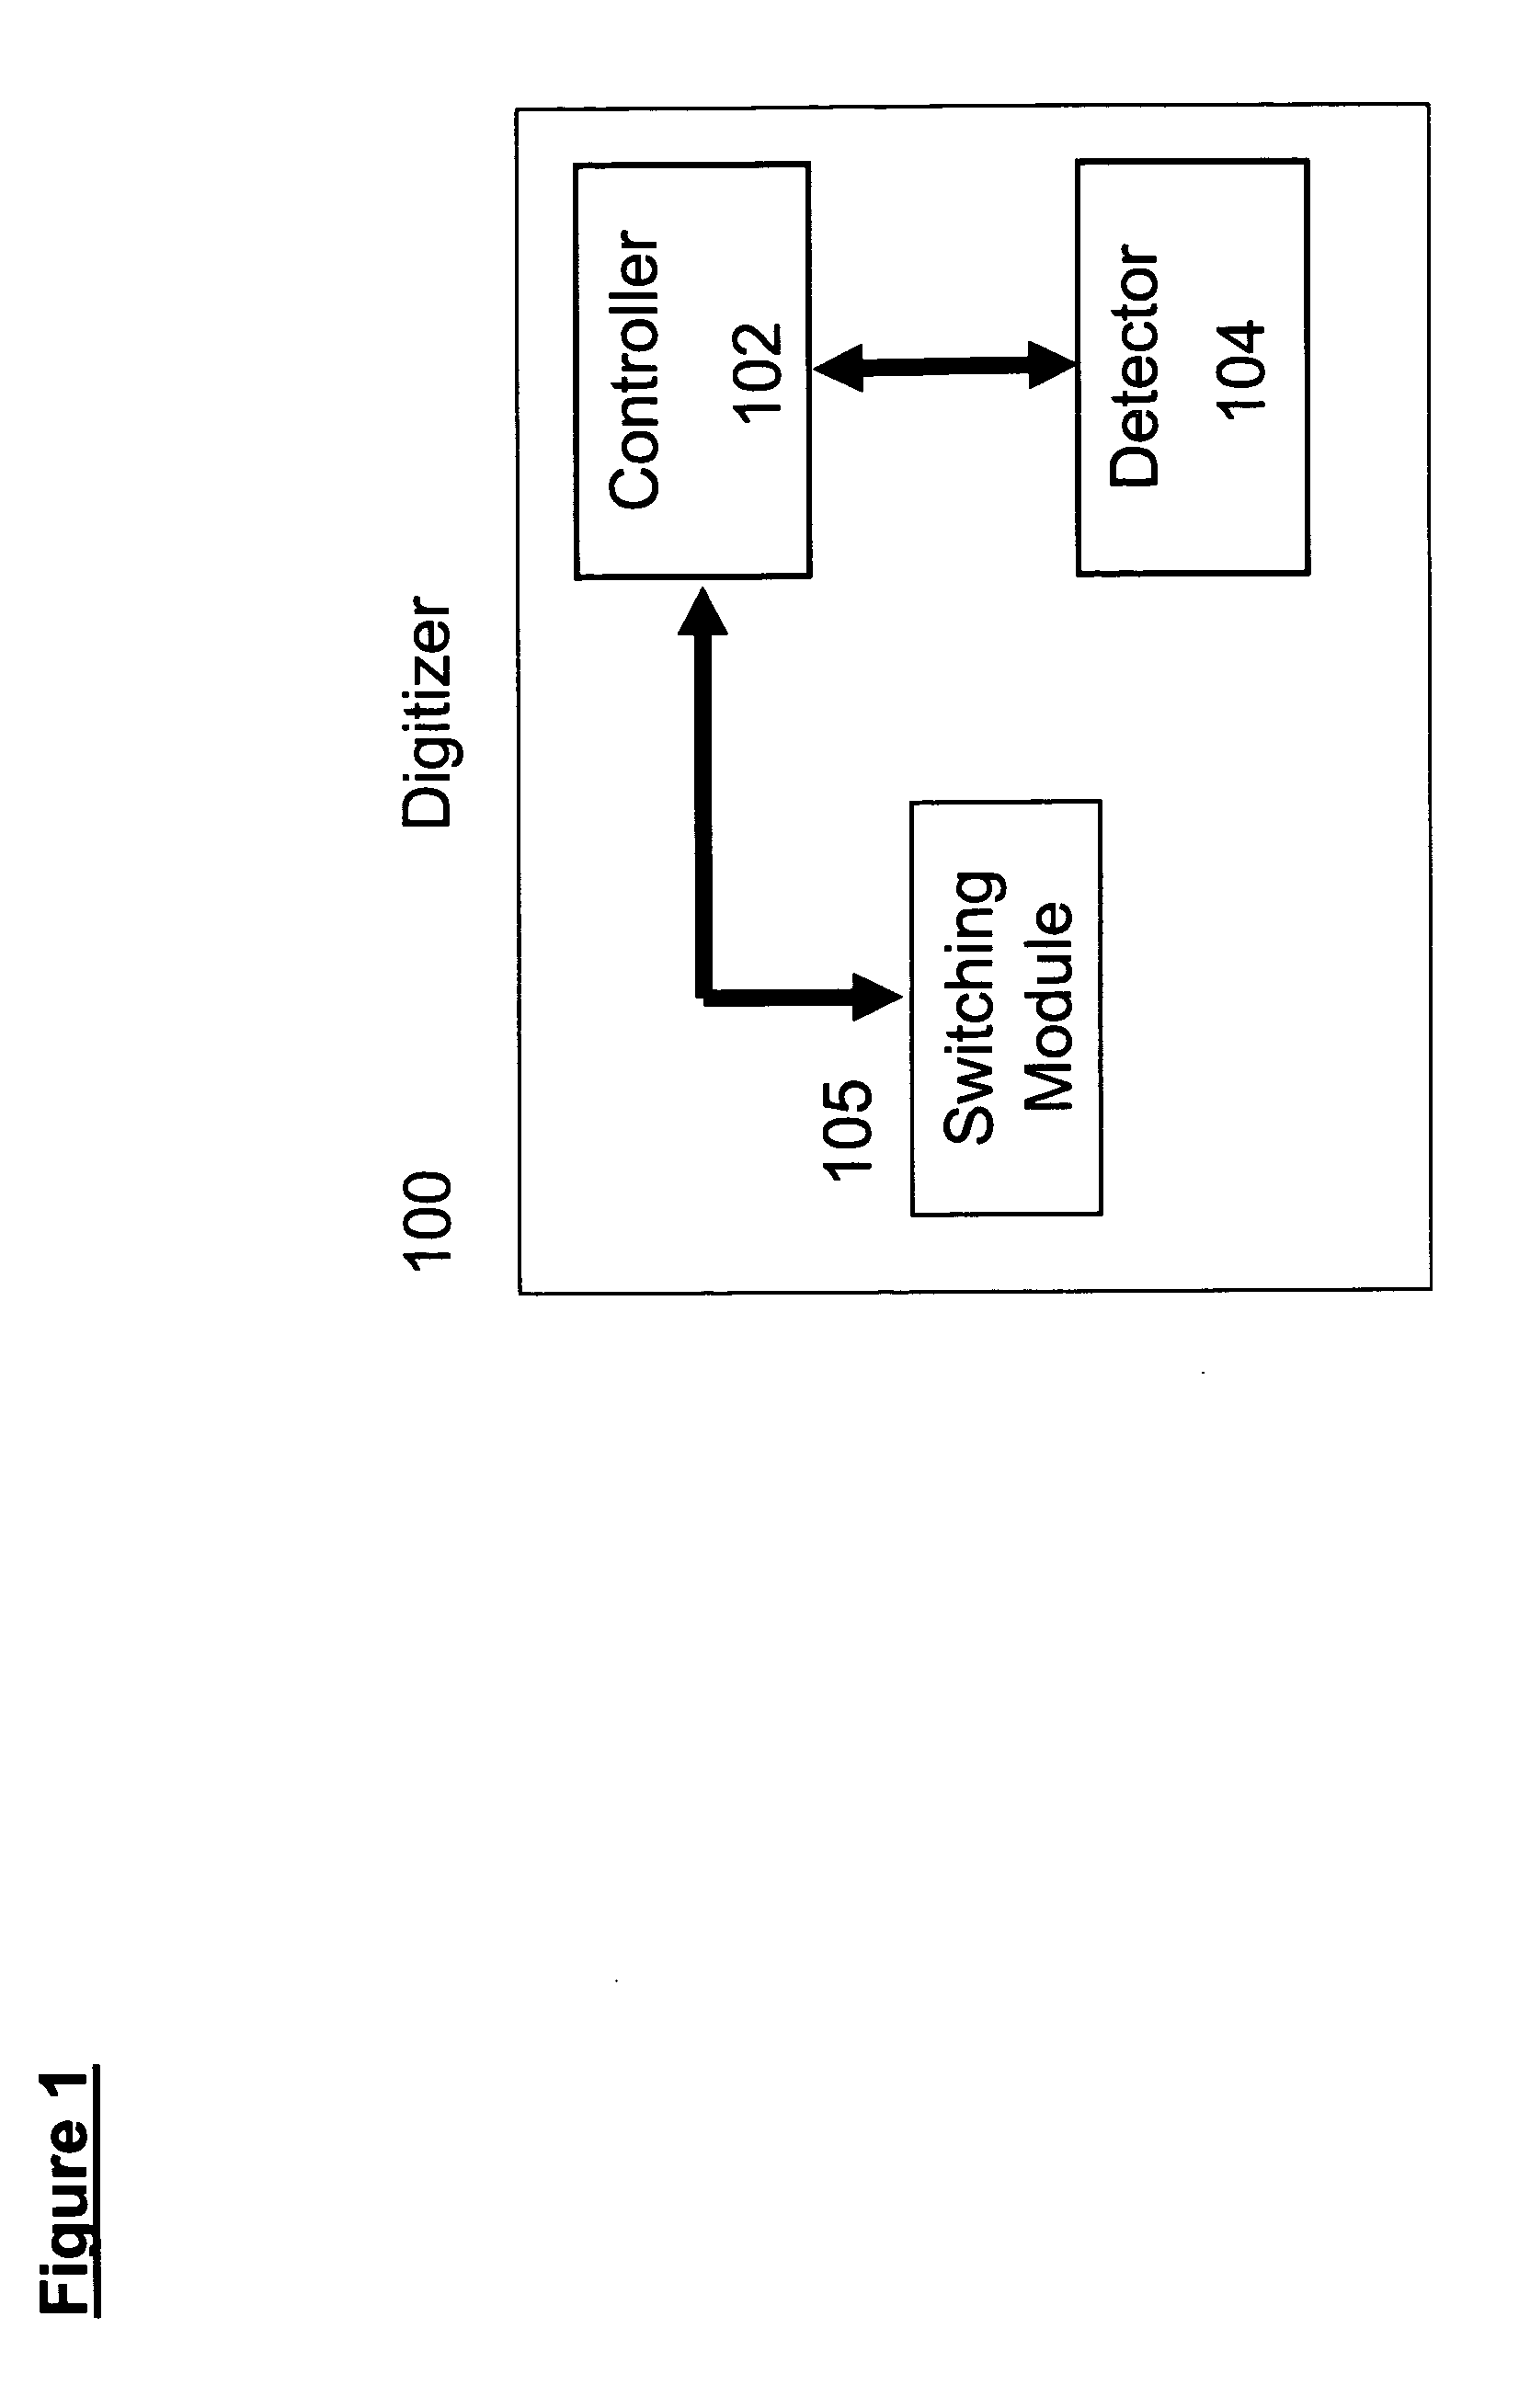 Automatic switching for a dual mode digitizer